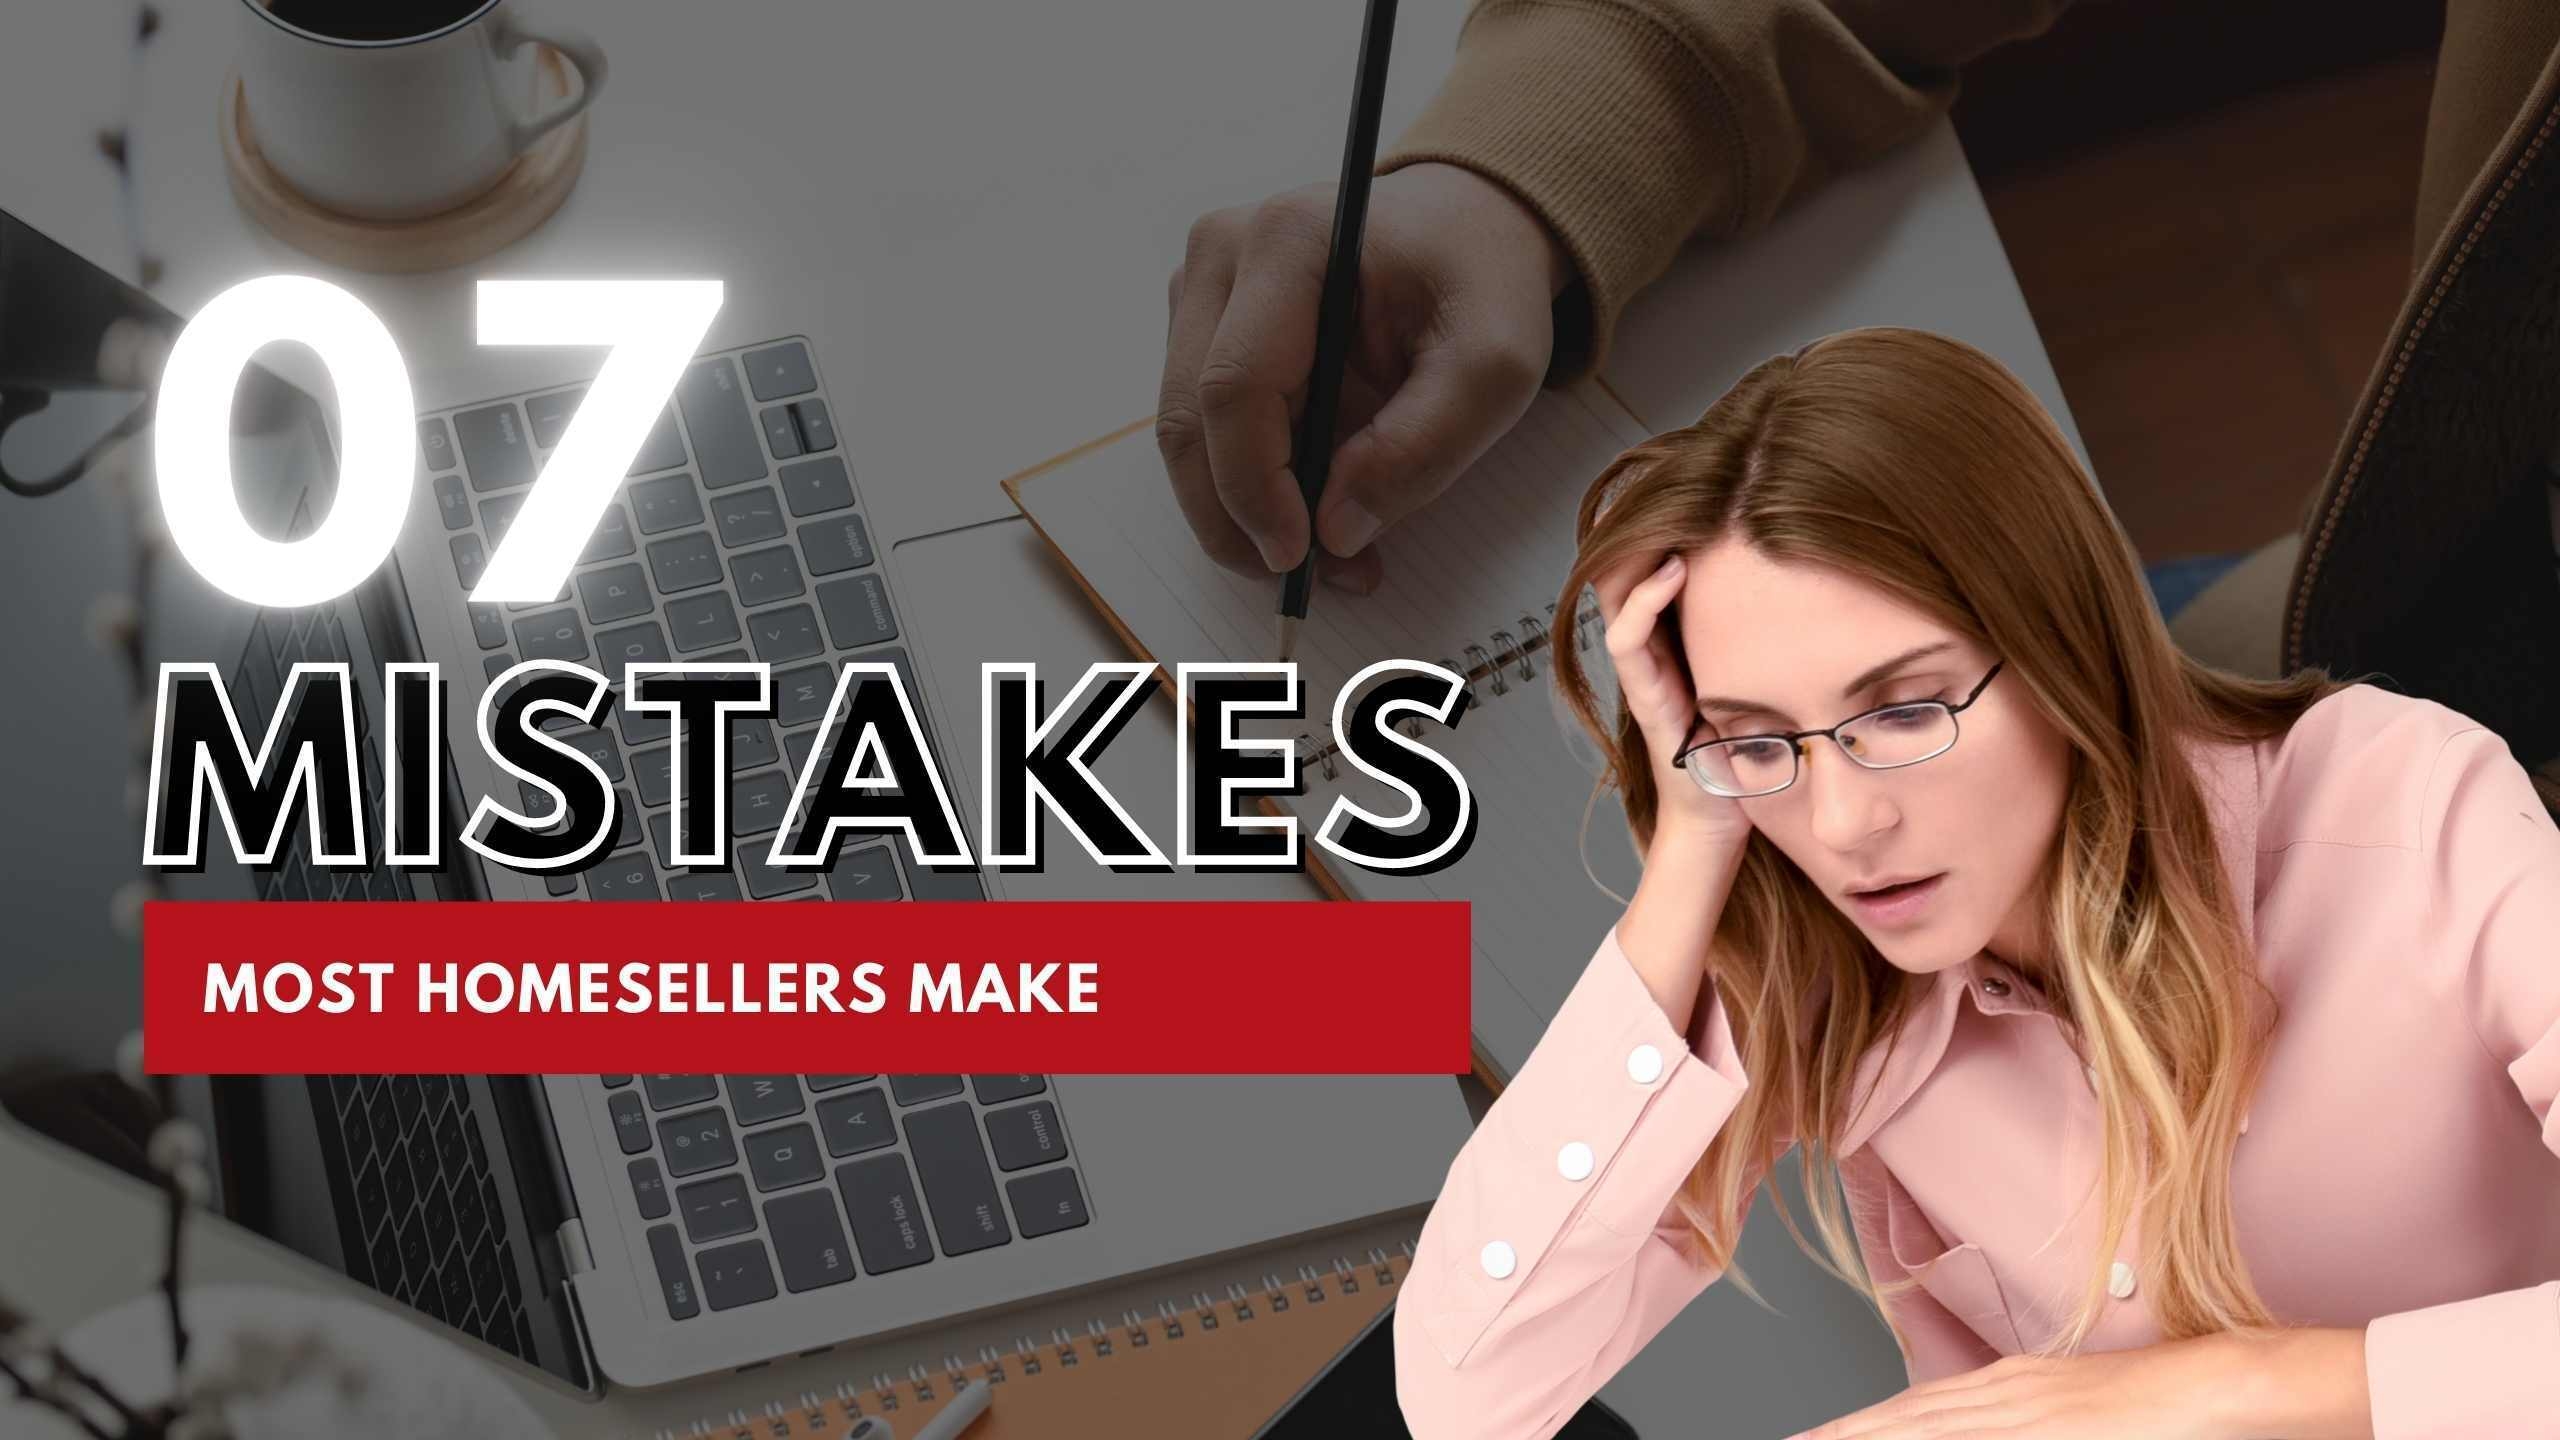 7 Mistakes Most Homesellers Make